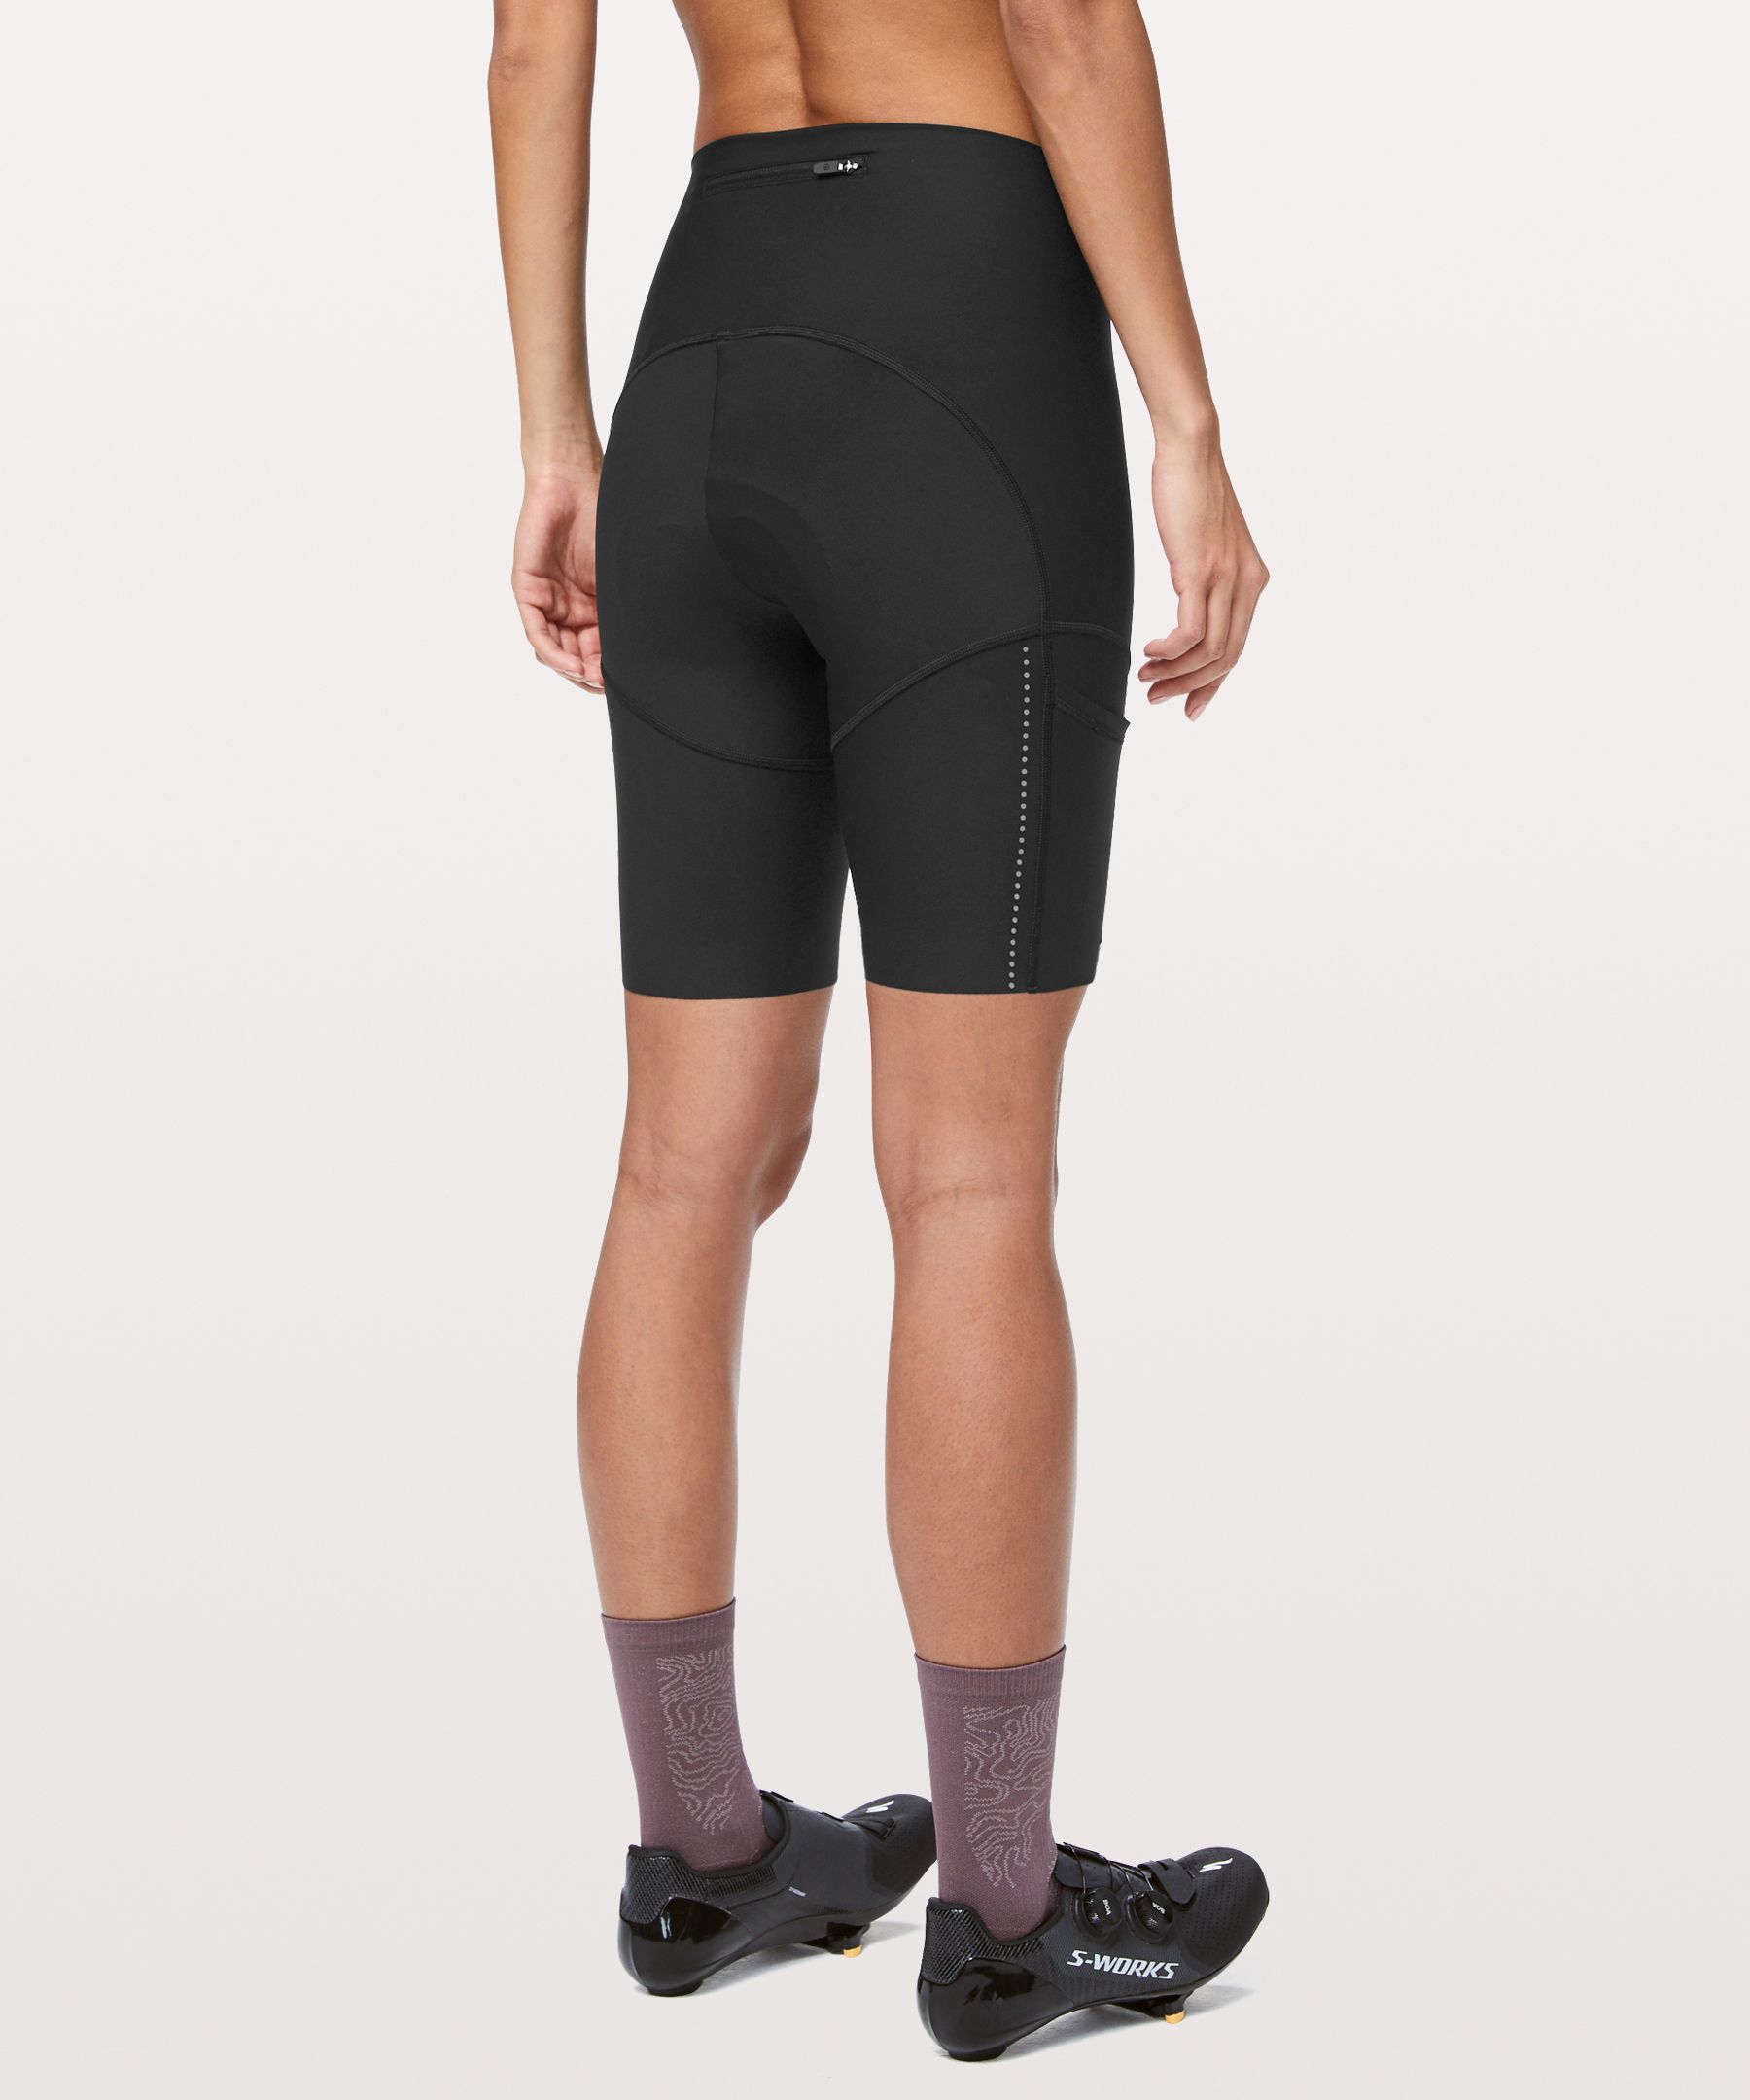 City To Summit Cycling Short | Women's 